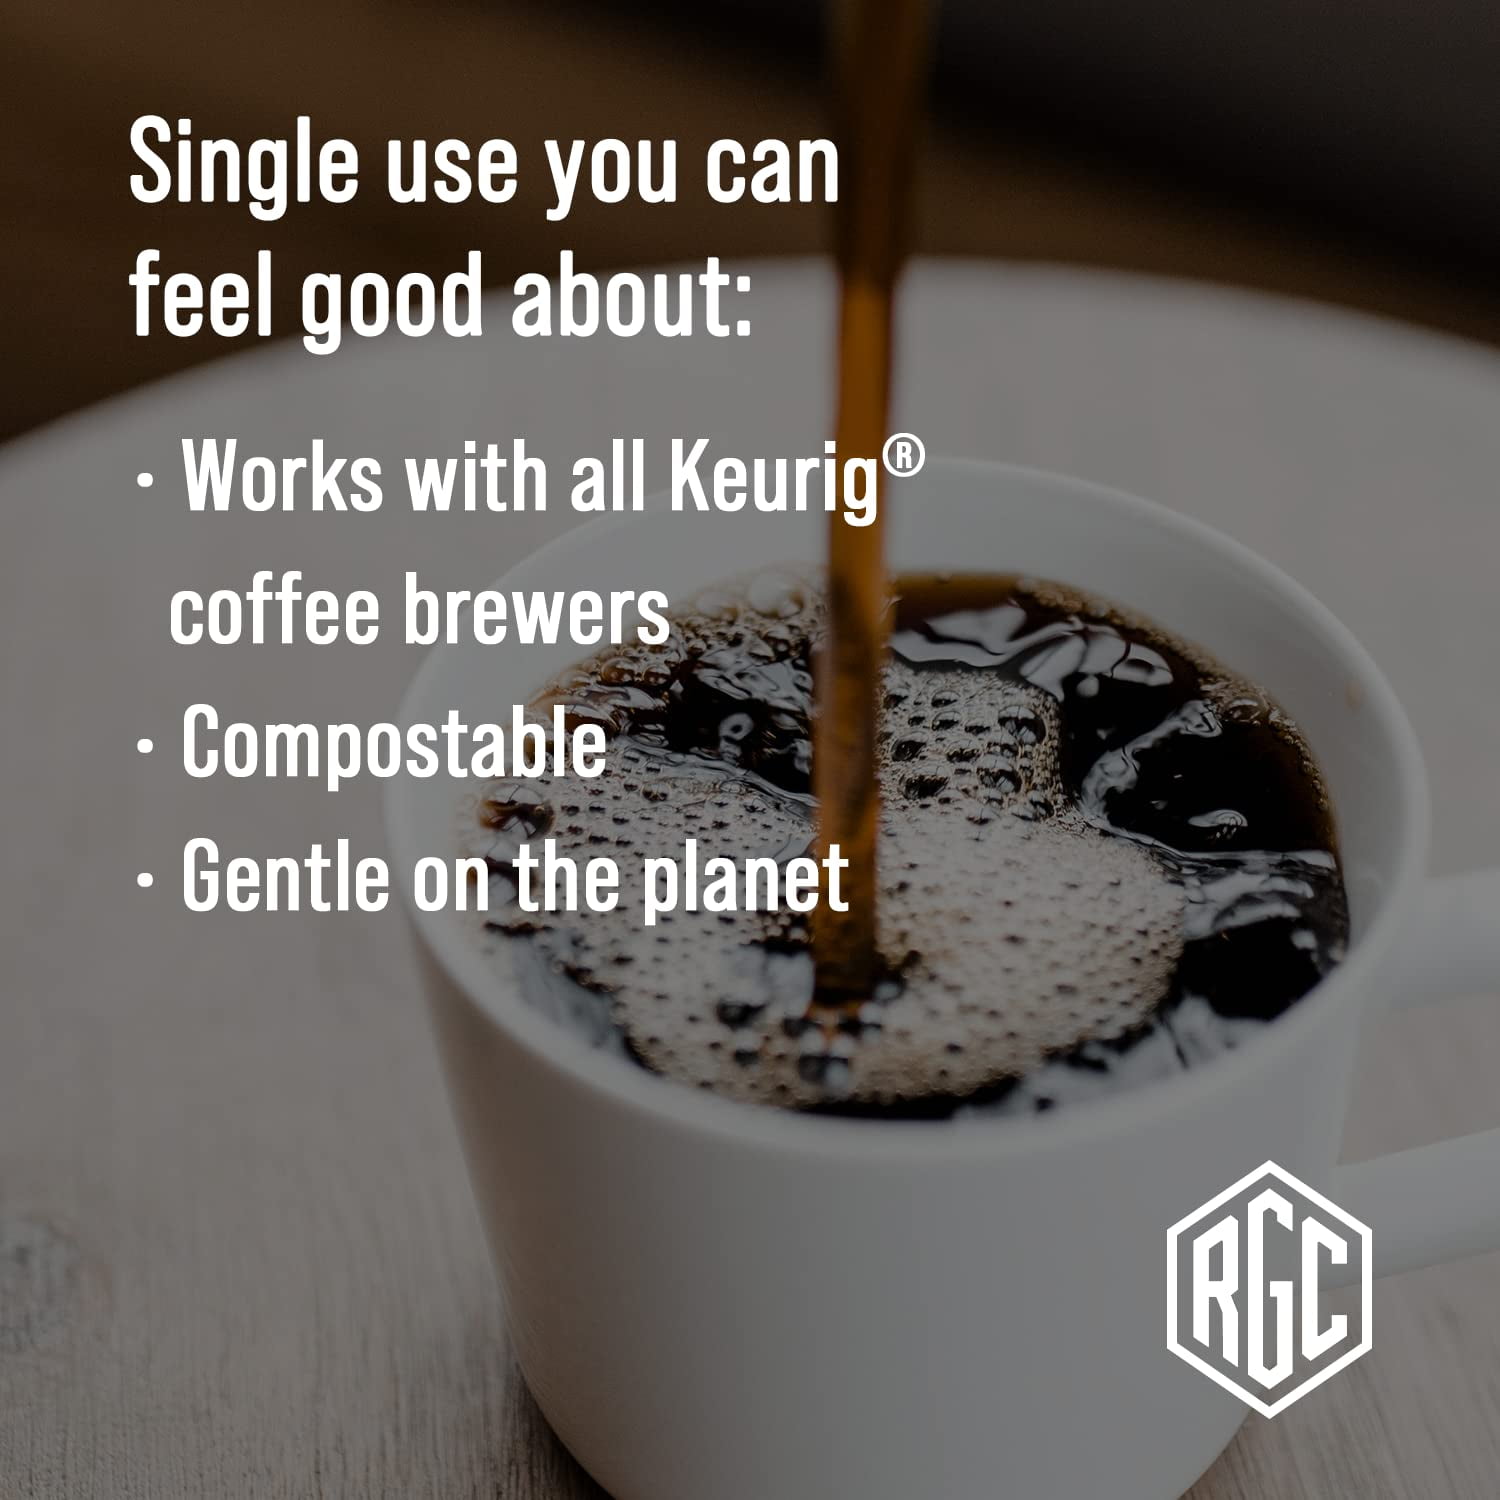 What Is the Coffee Grind Chart? – Real Good Coffee Co.